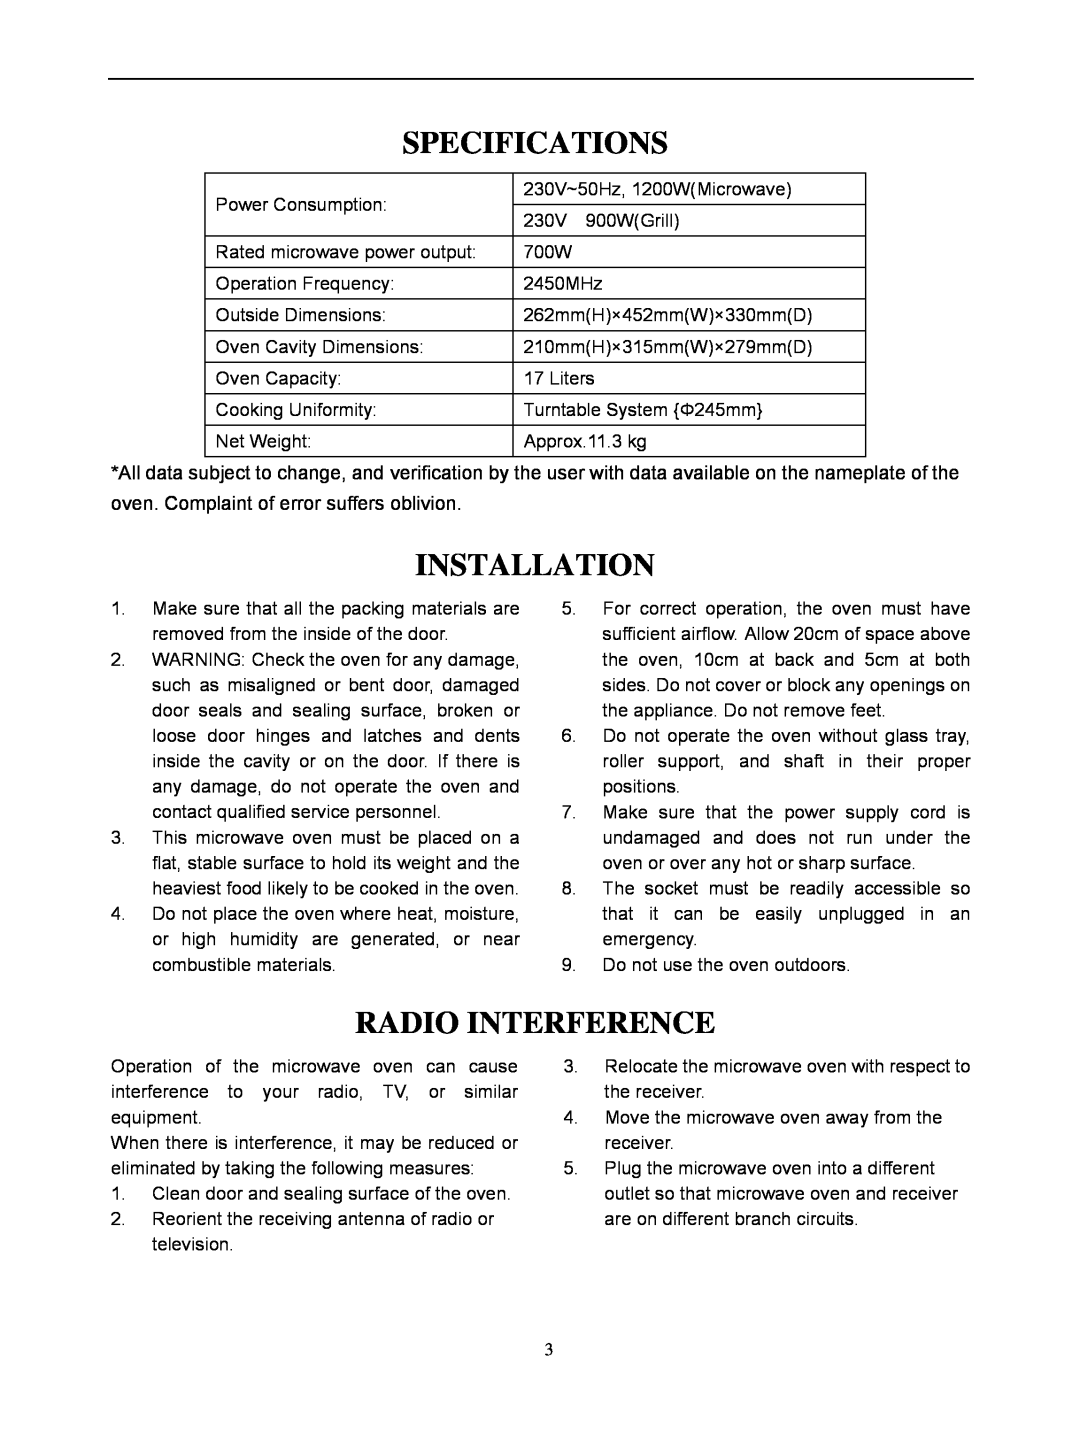 IFB Appliances 17PG1S owner manual Specifications, Installation, Radio Interference 